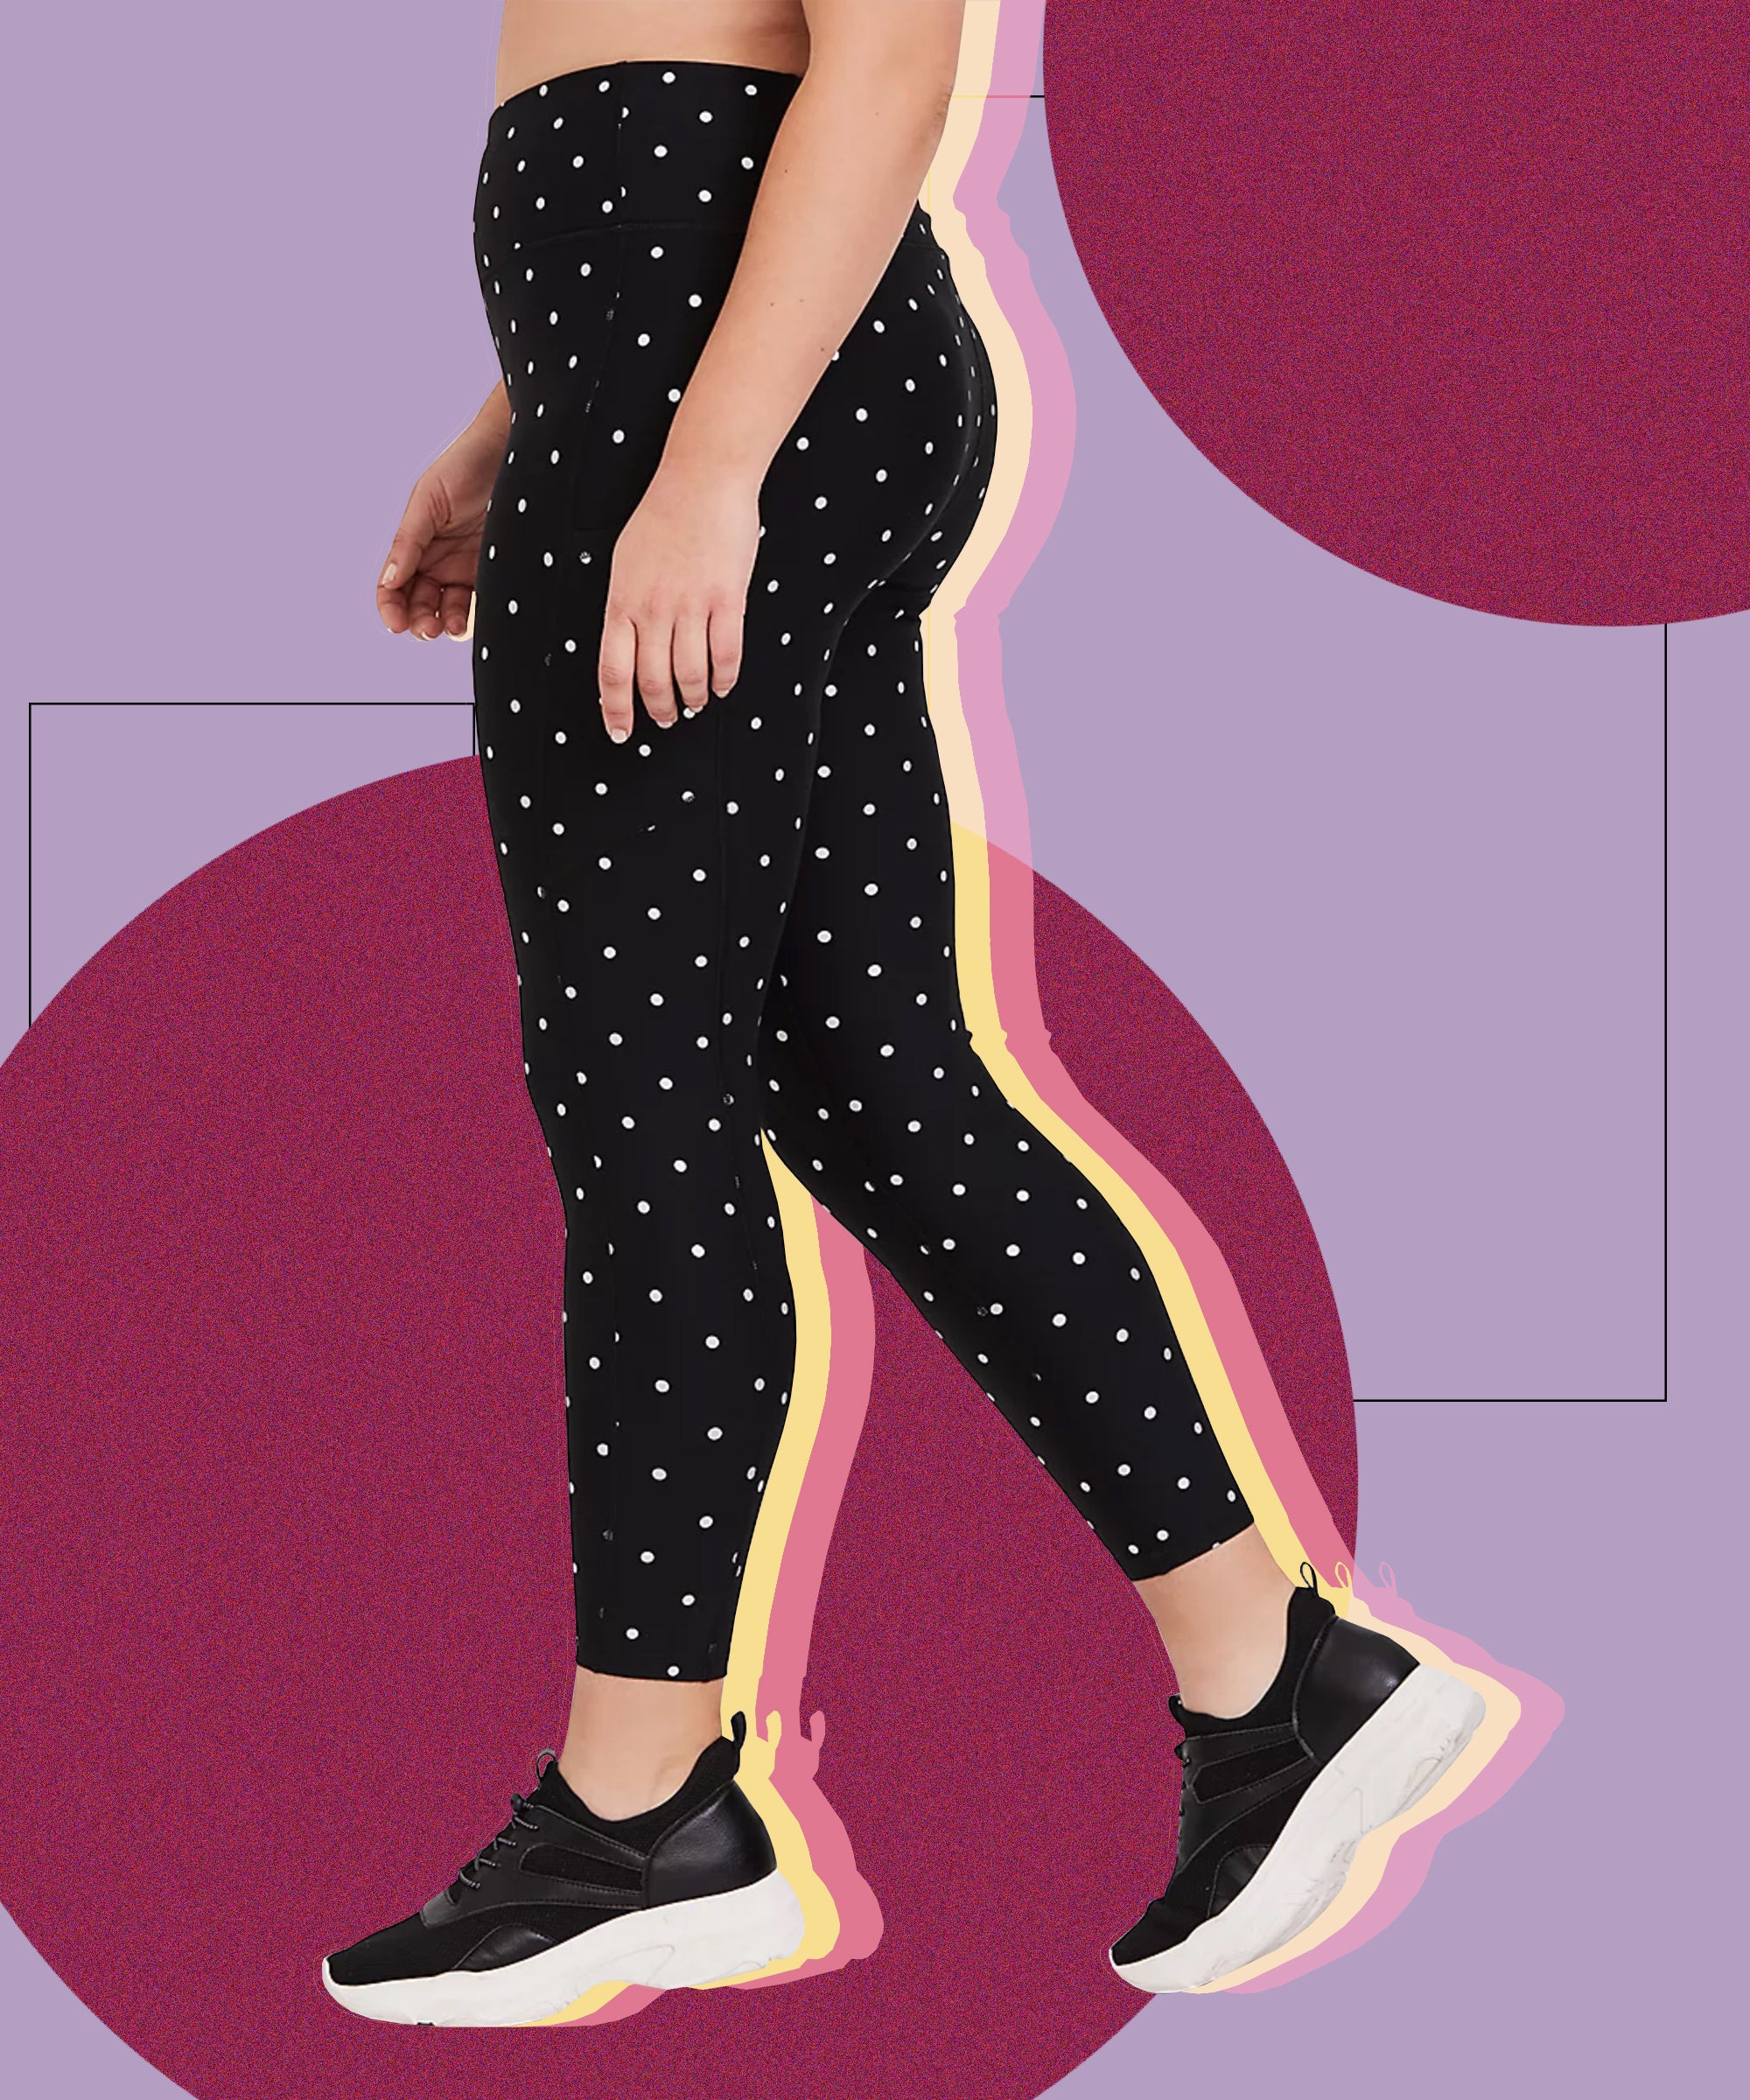 10 Best  Deals on Leggings for Every Workout and Occassion — All  Under $30